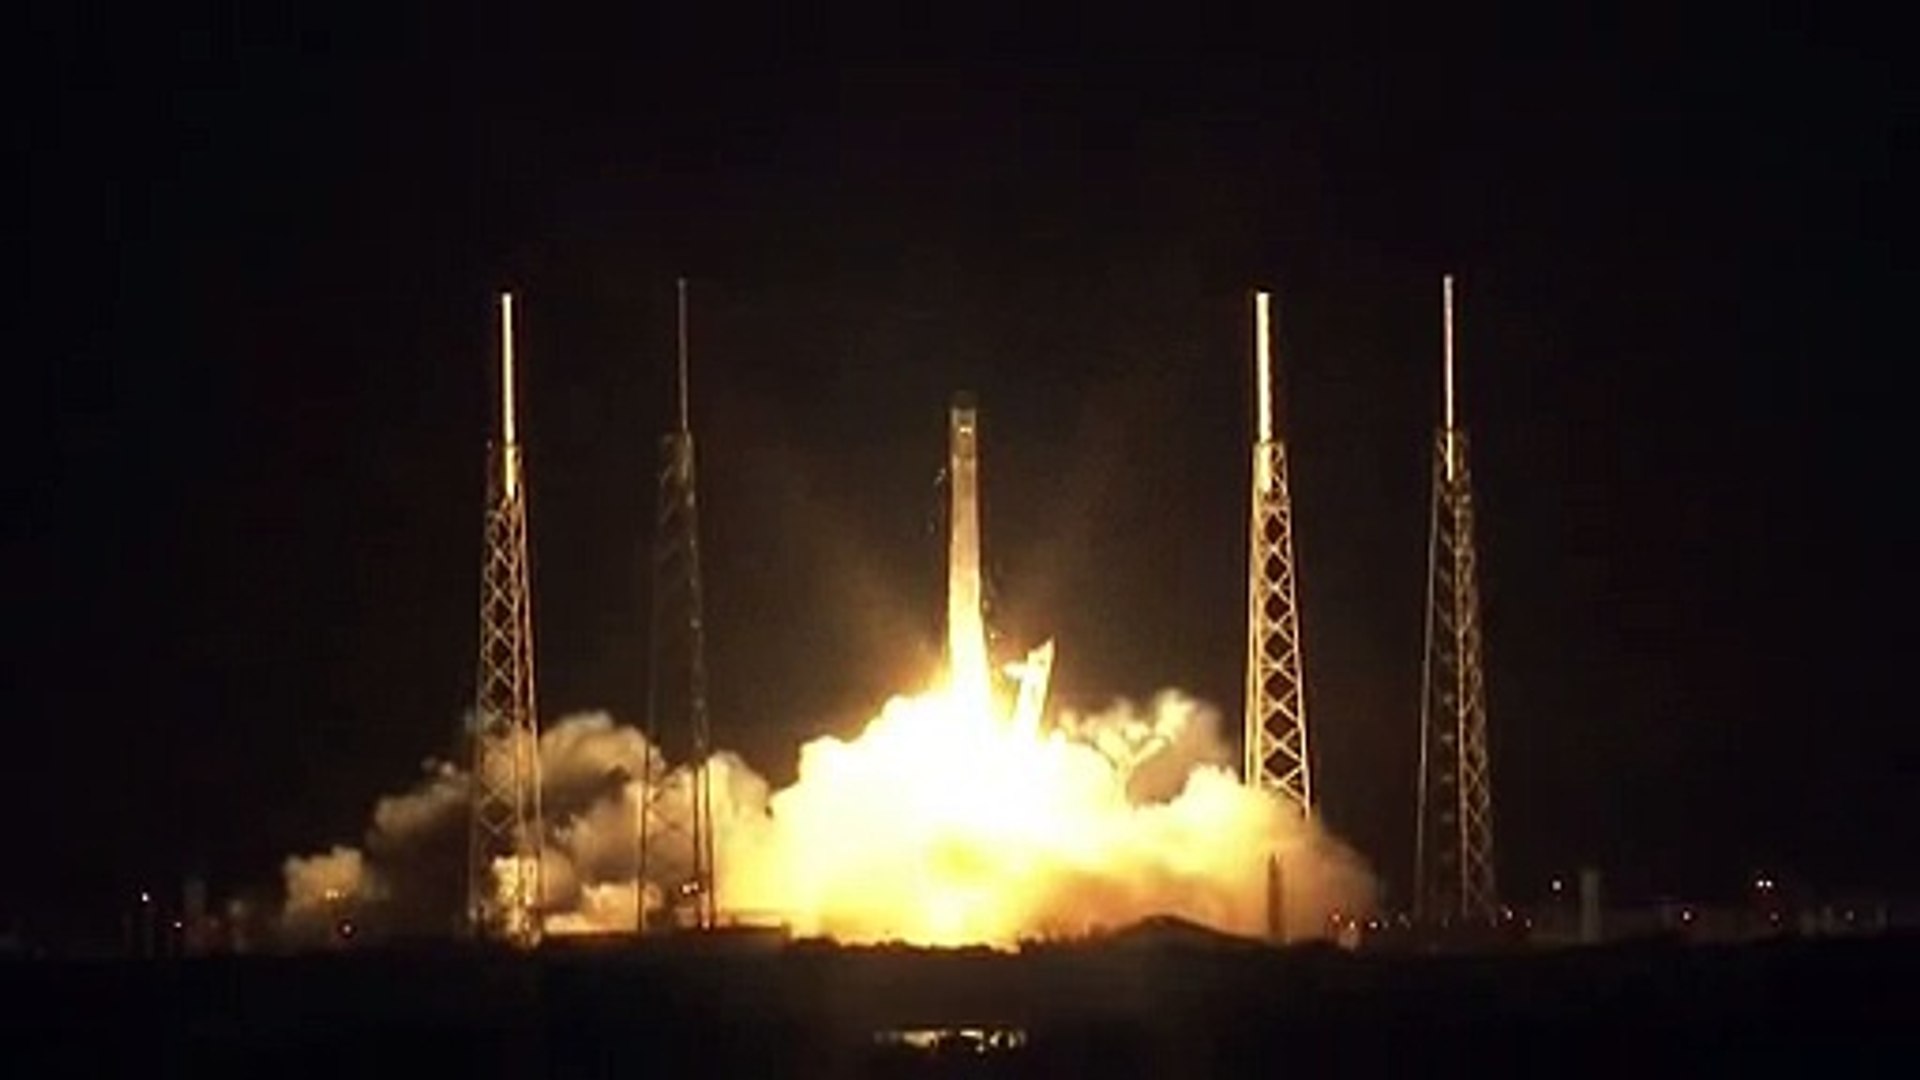 SpaceX's CRS-1 mission is an important milestone in the company's history. This mission will provide